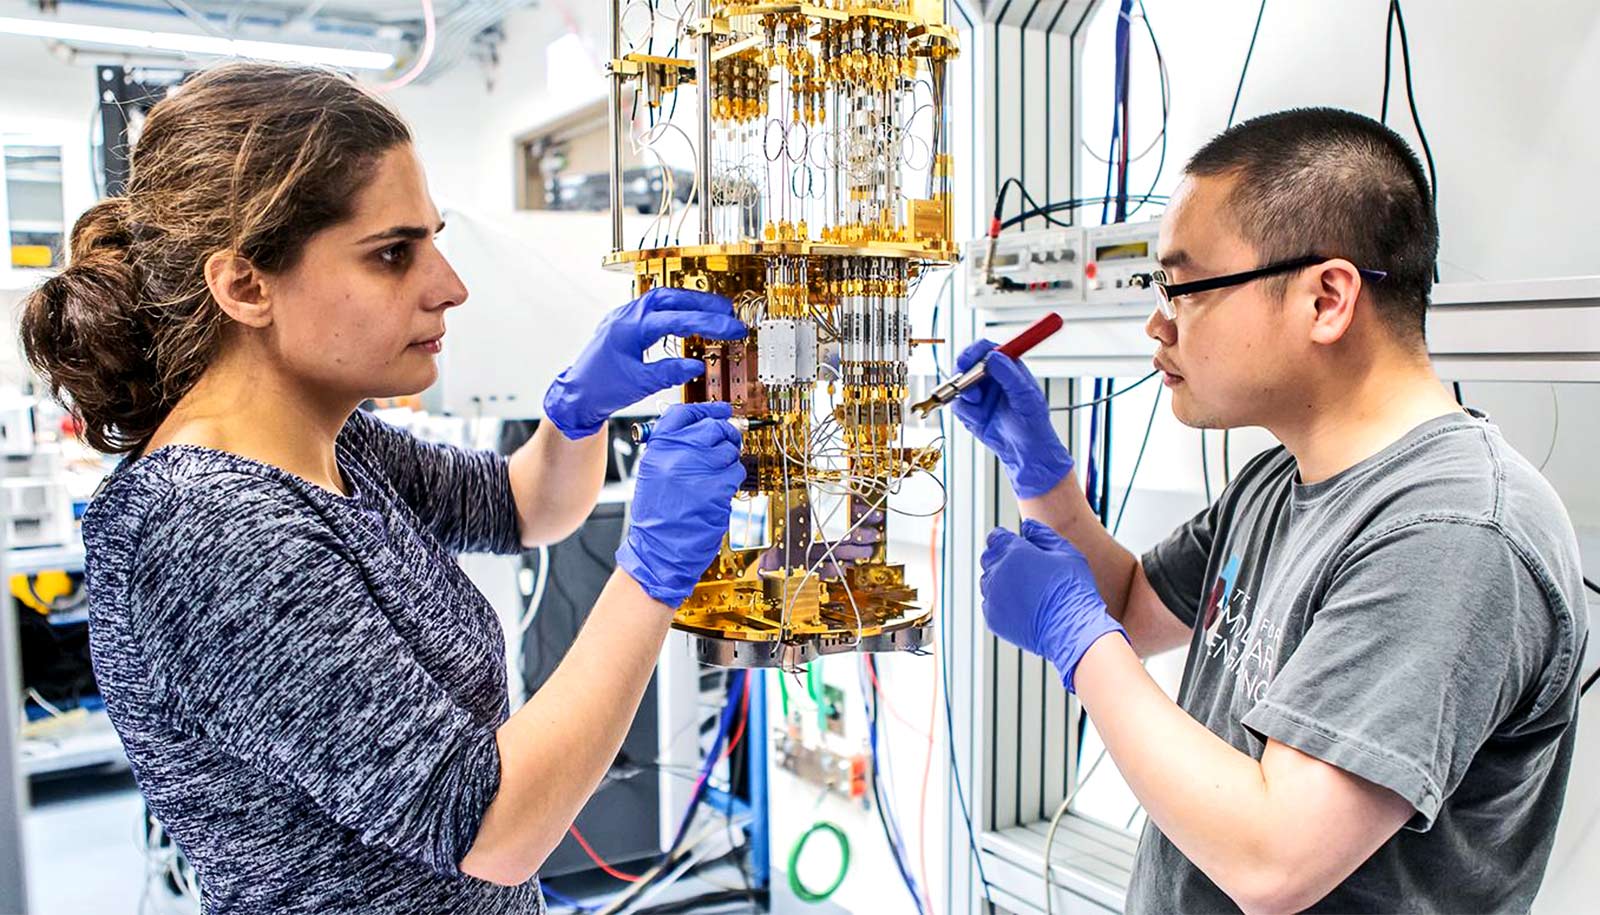 Postdoctoral researcher Audrey Bienfait (left) and graduate student Youpeng Zhong work in the laboratory of Andrew Cleland. Source: Nancy Wong/U. Chicago